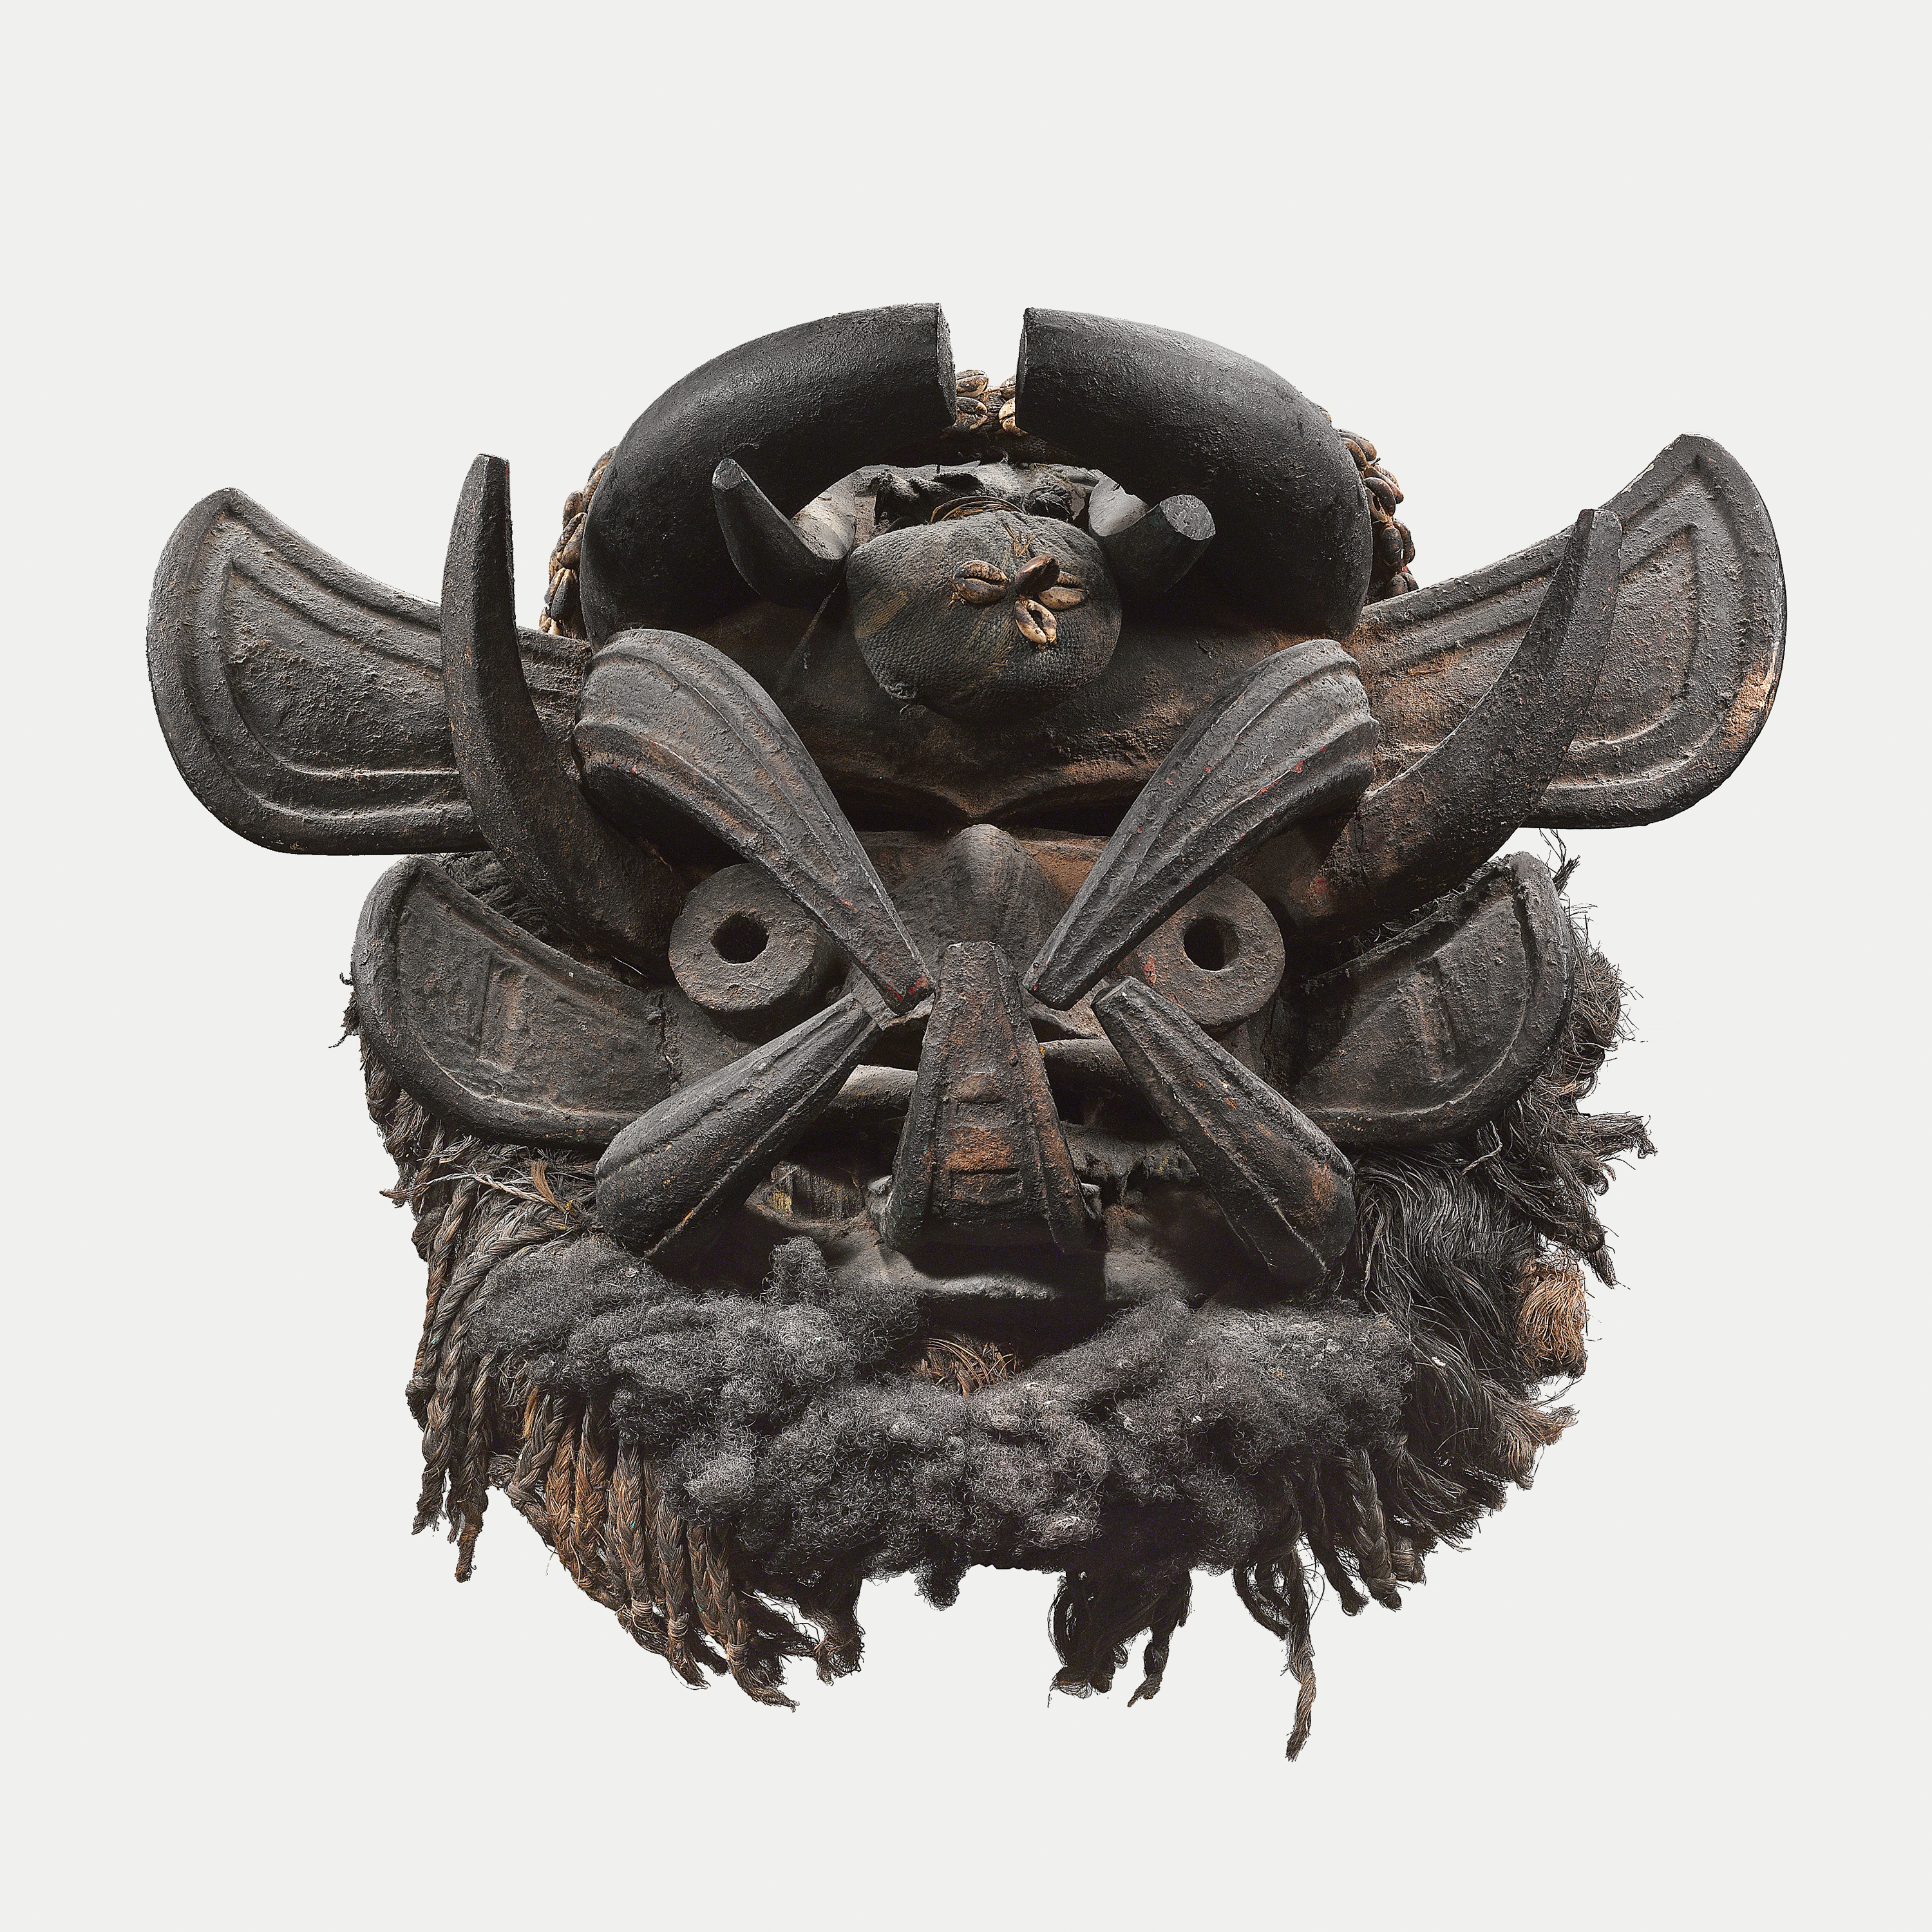 The Language of Beauty in African Art | The Art Institute of Chicago